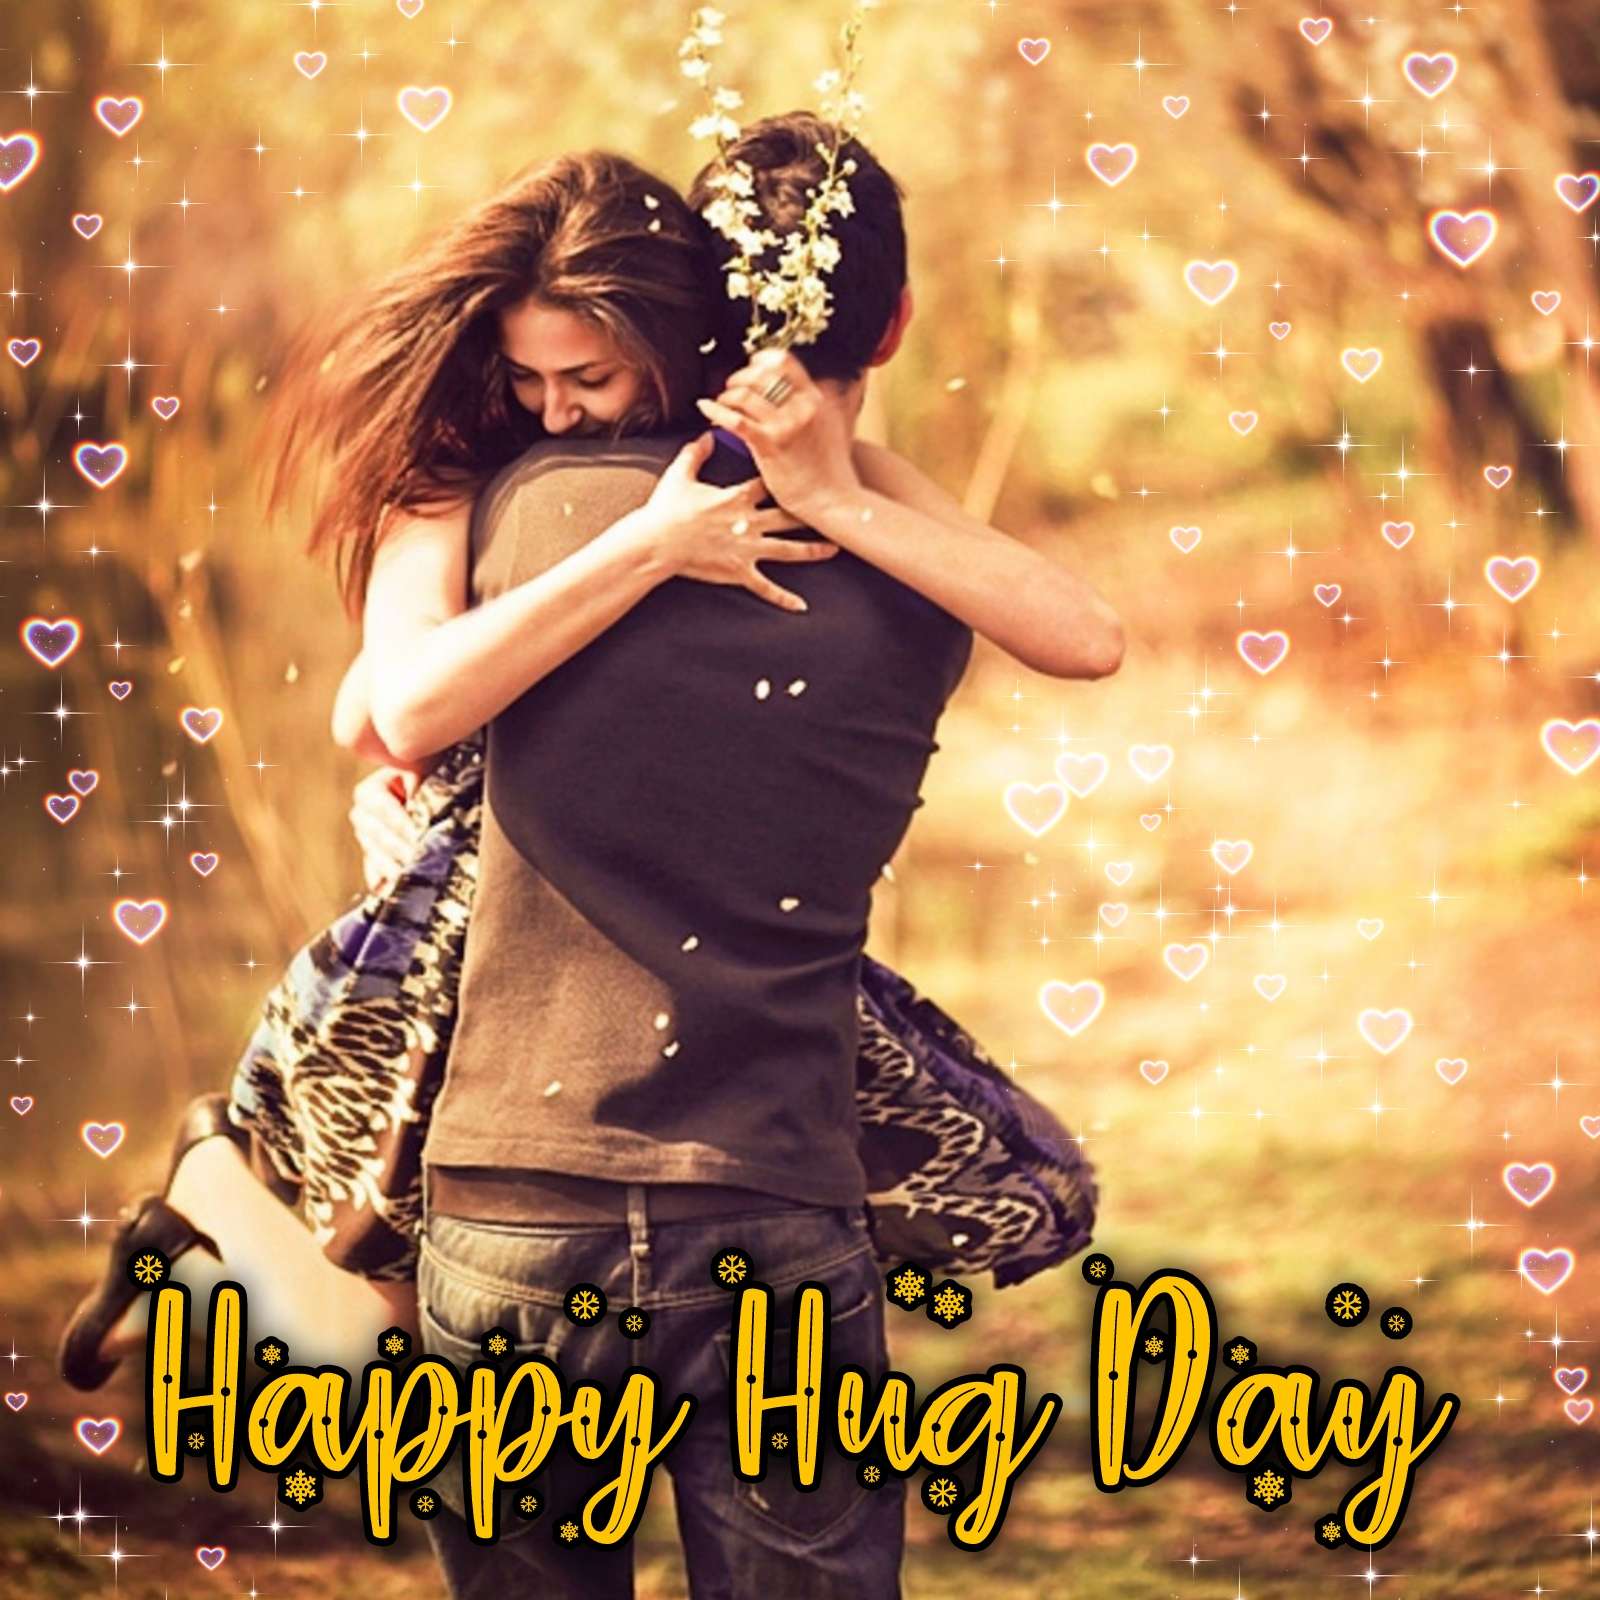 Romantic Hug Day Images Download